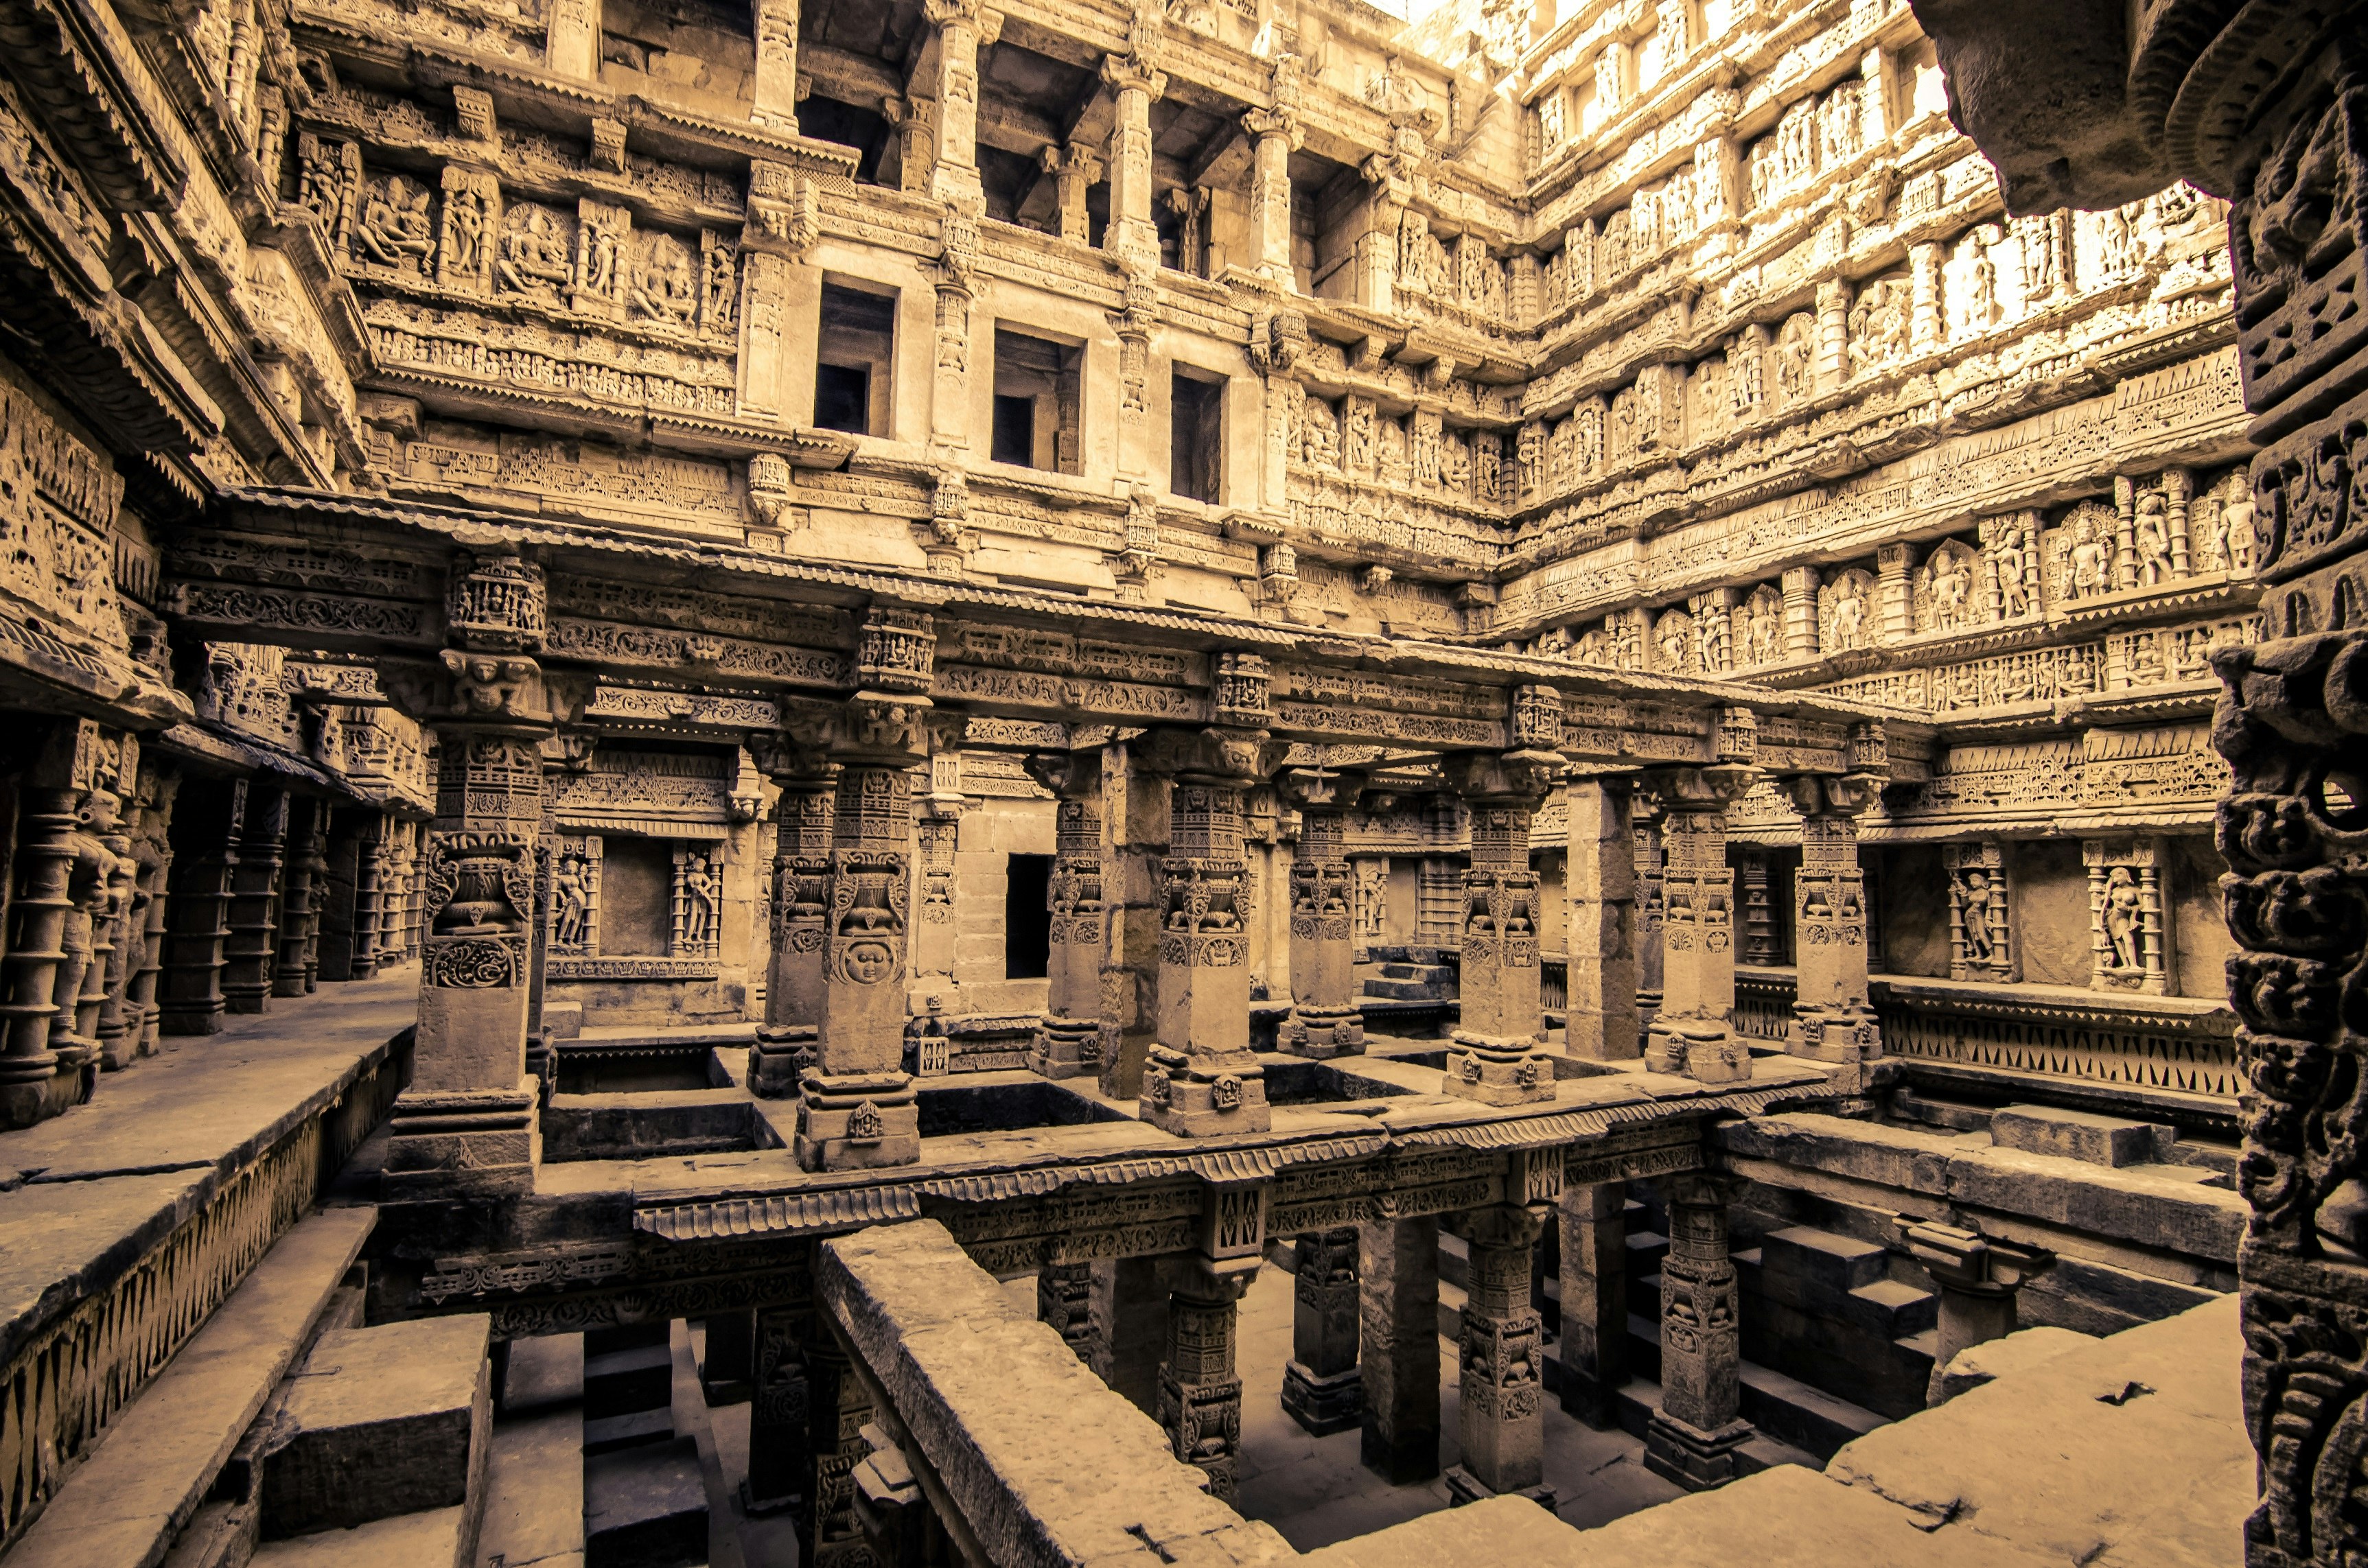 The interior of Rani-ki-Vav stepwell in Gujarat. The stone walls and pillars on the inside of the stepwell are covered in carvings of religious deities.